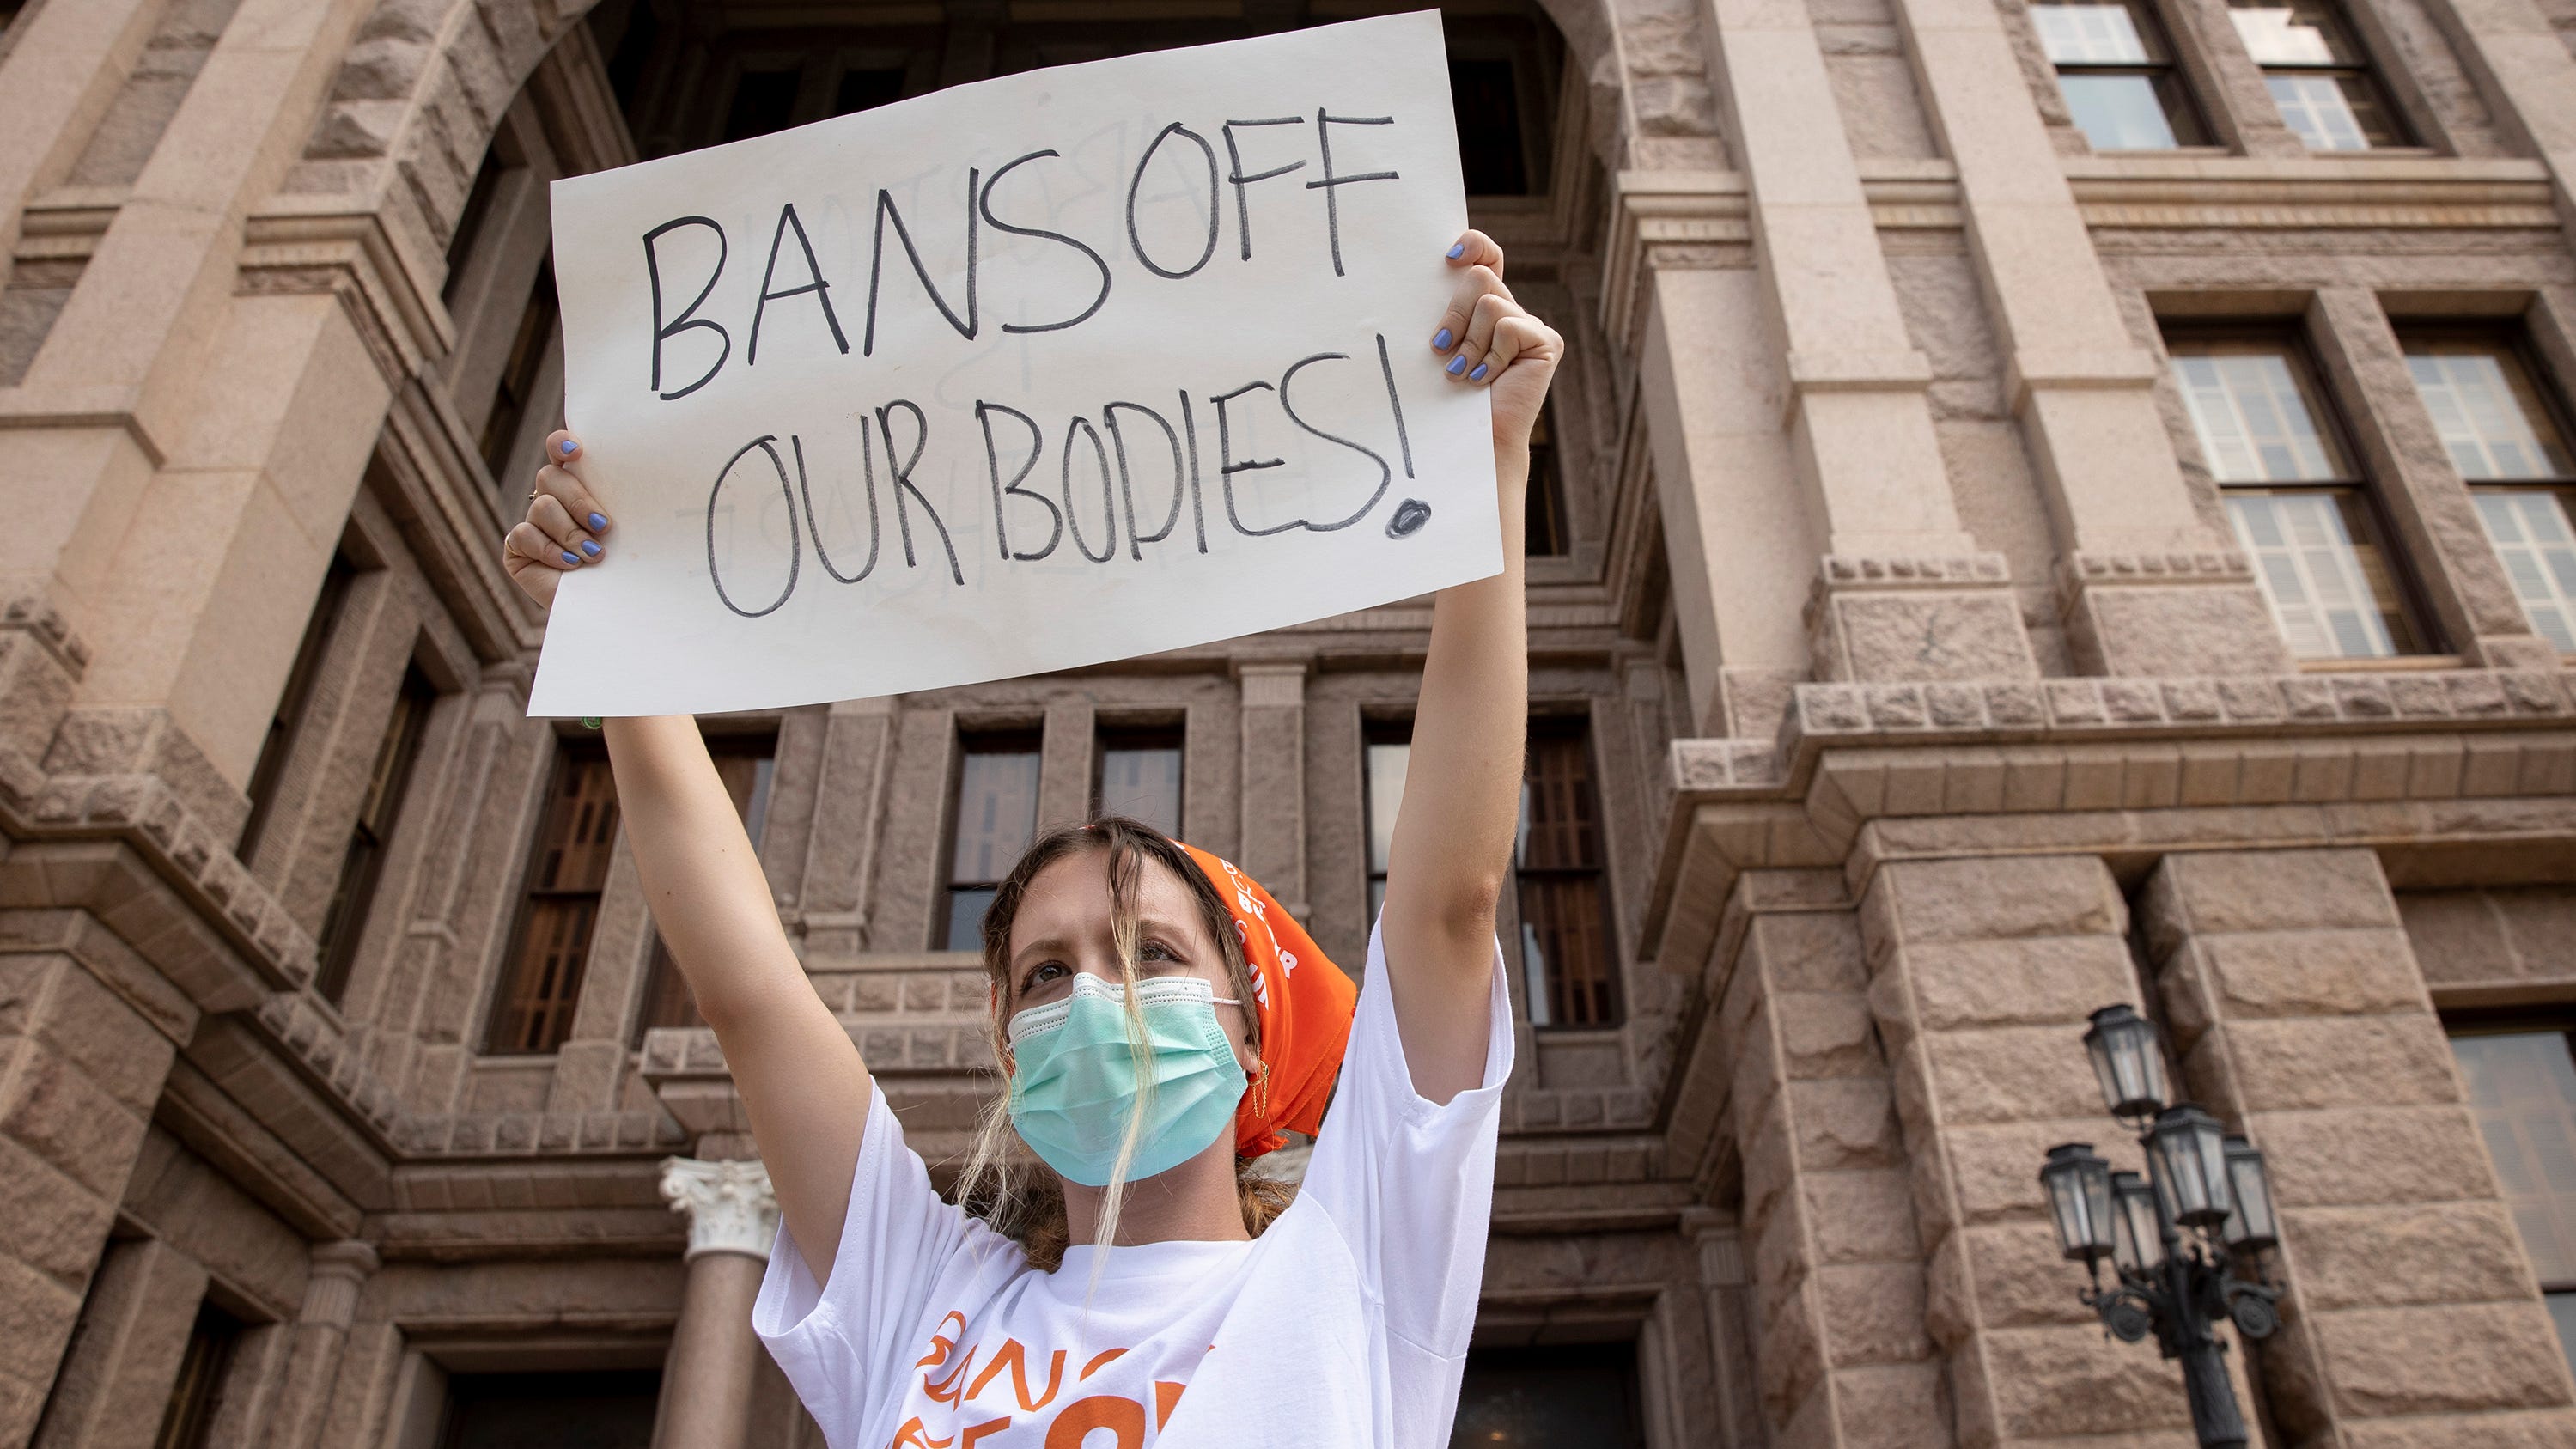 Texas abortion law will send more women to New Mexico, advocates say